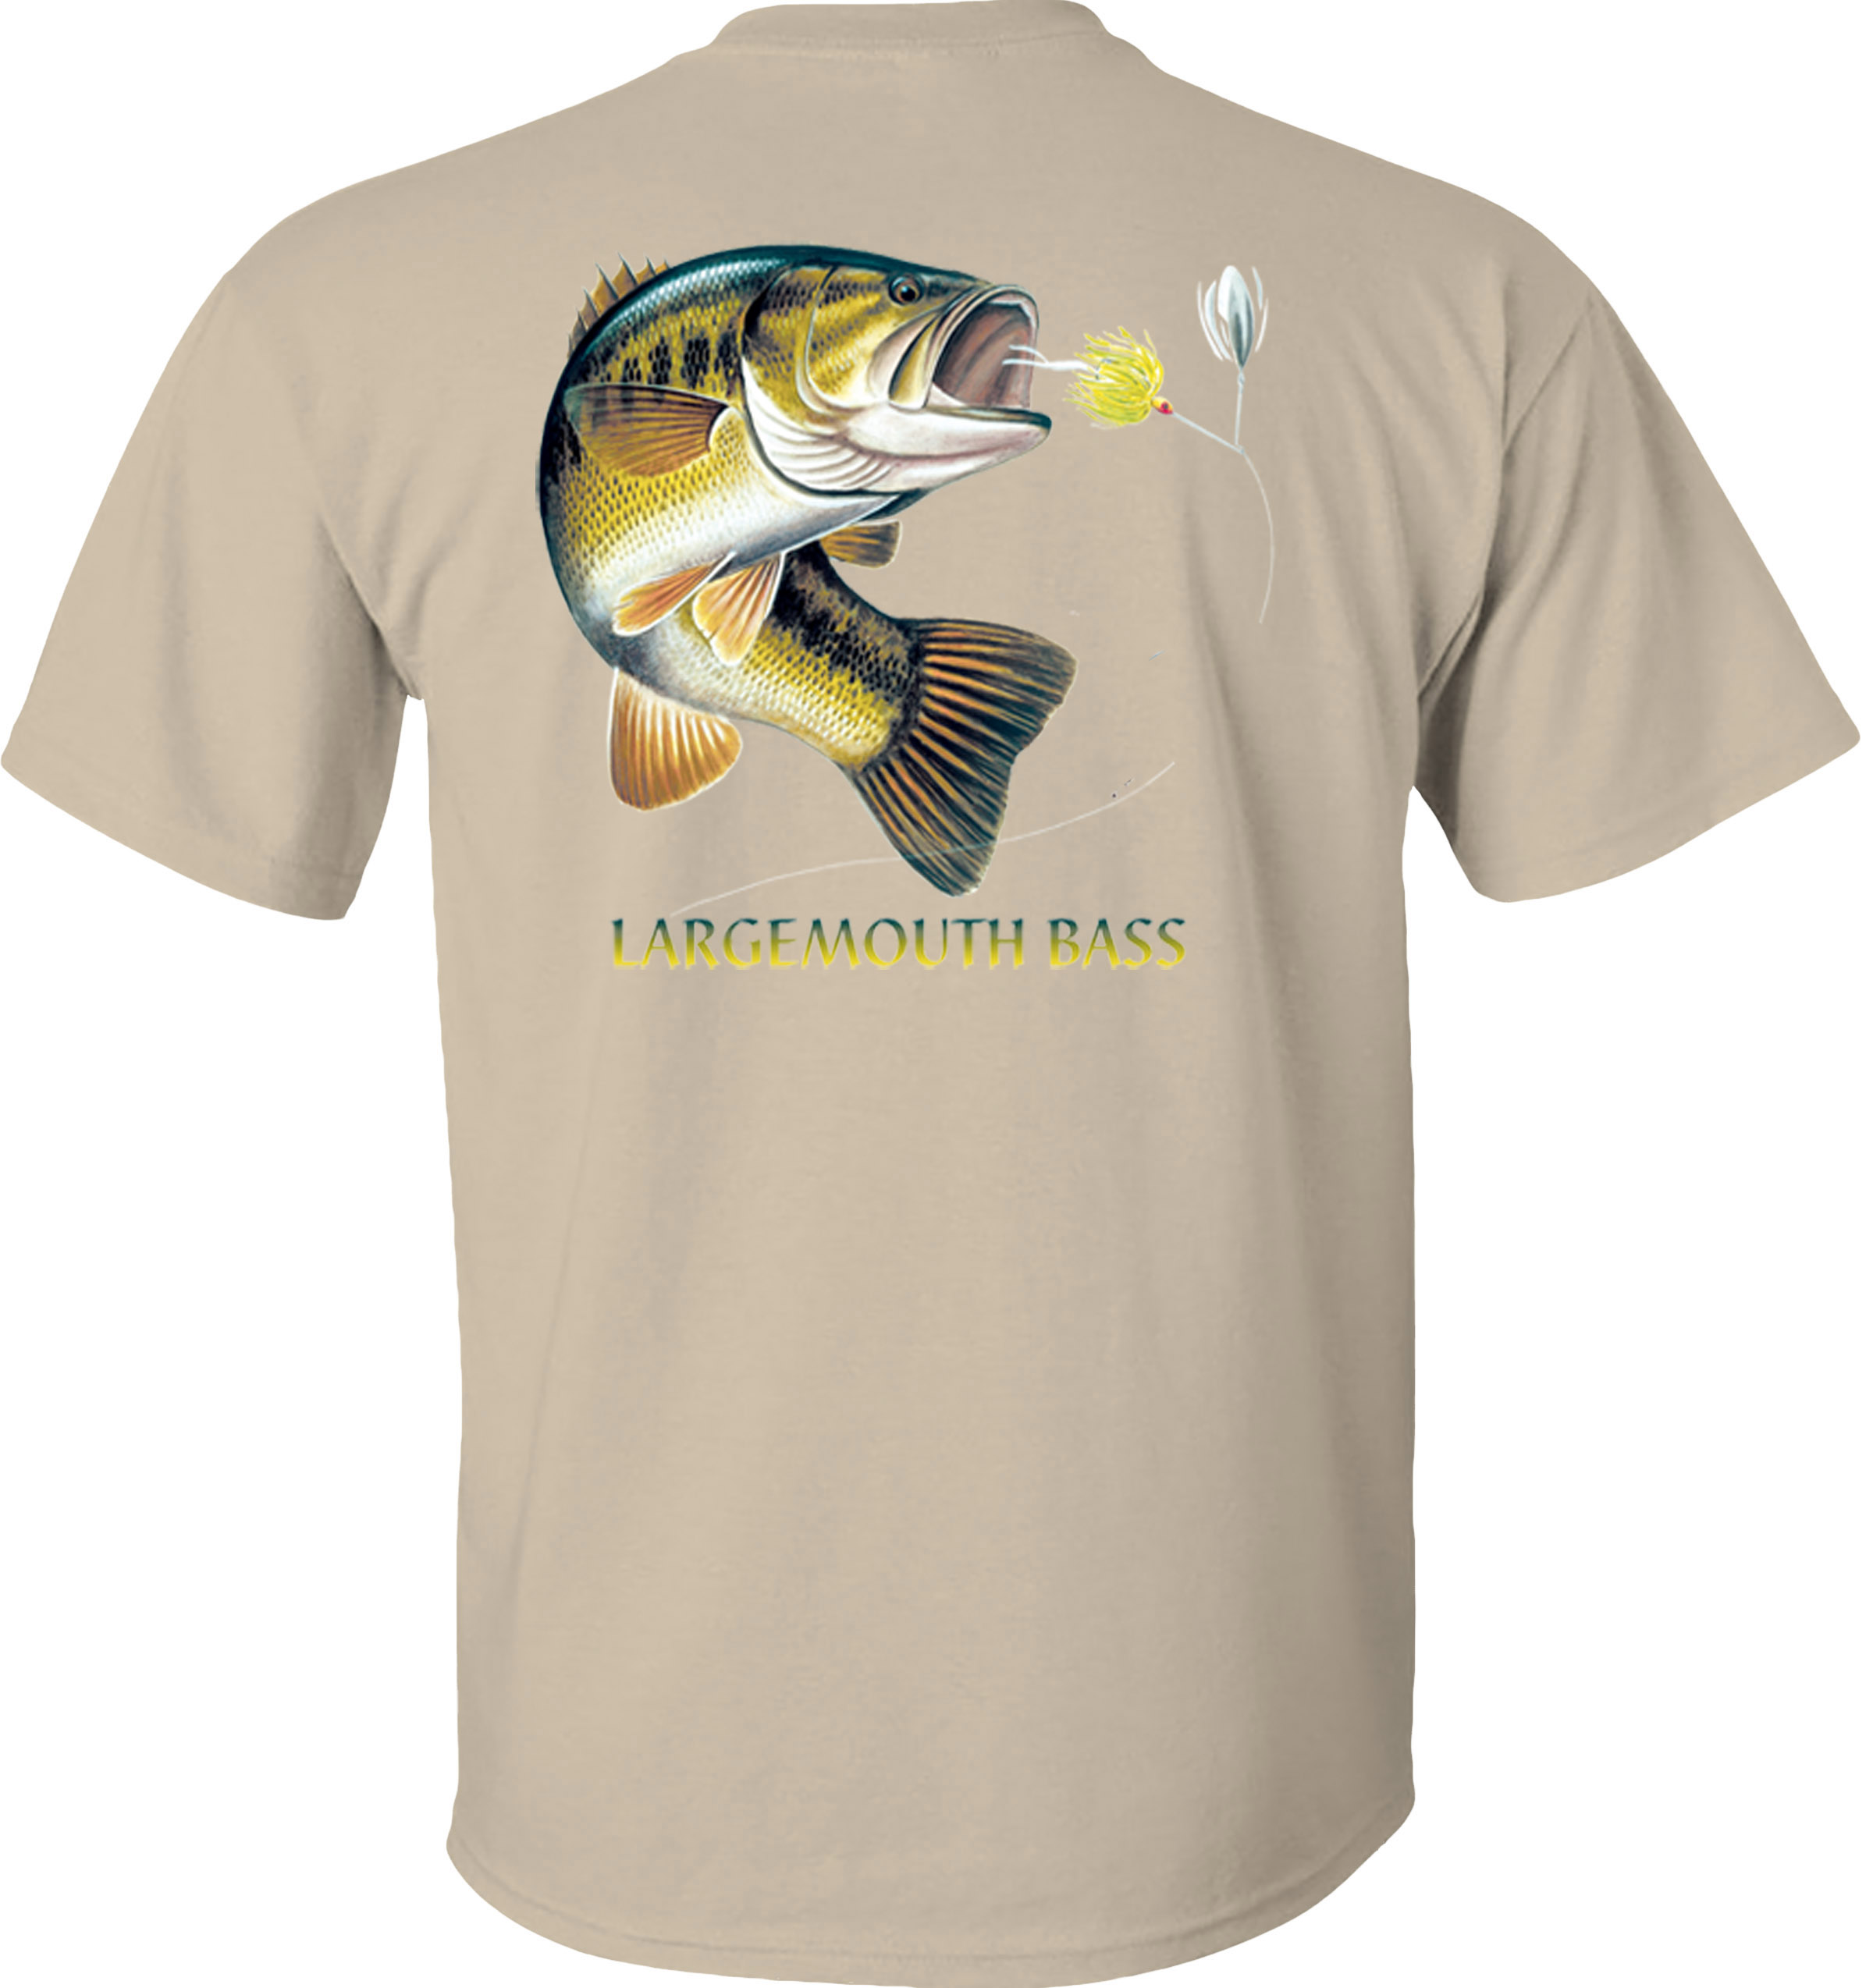 Fair Game Largemouth Bass T-Shirt, combination profile, Fishing Graphic  Tee-Sand-L